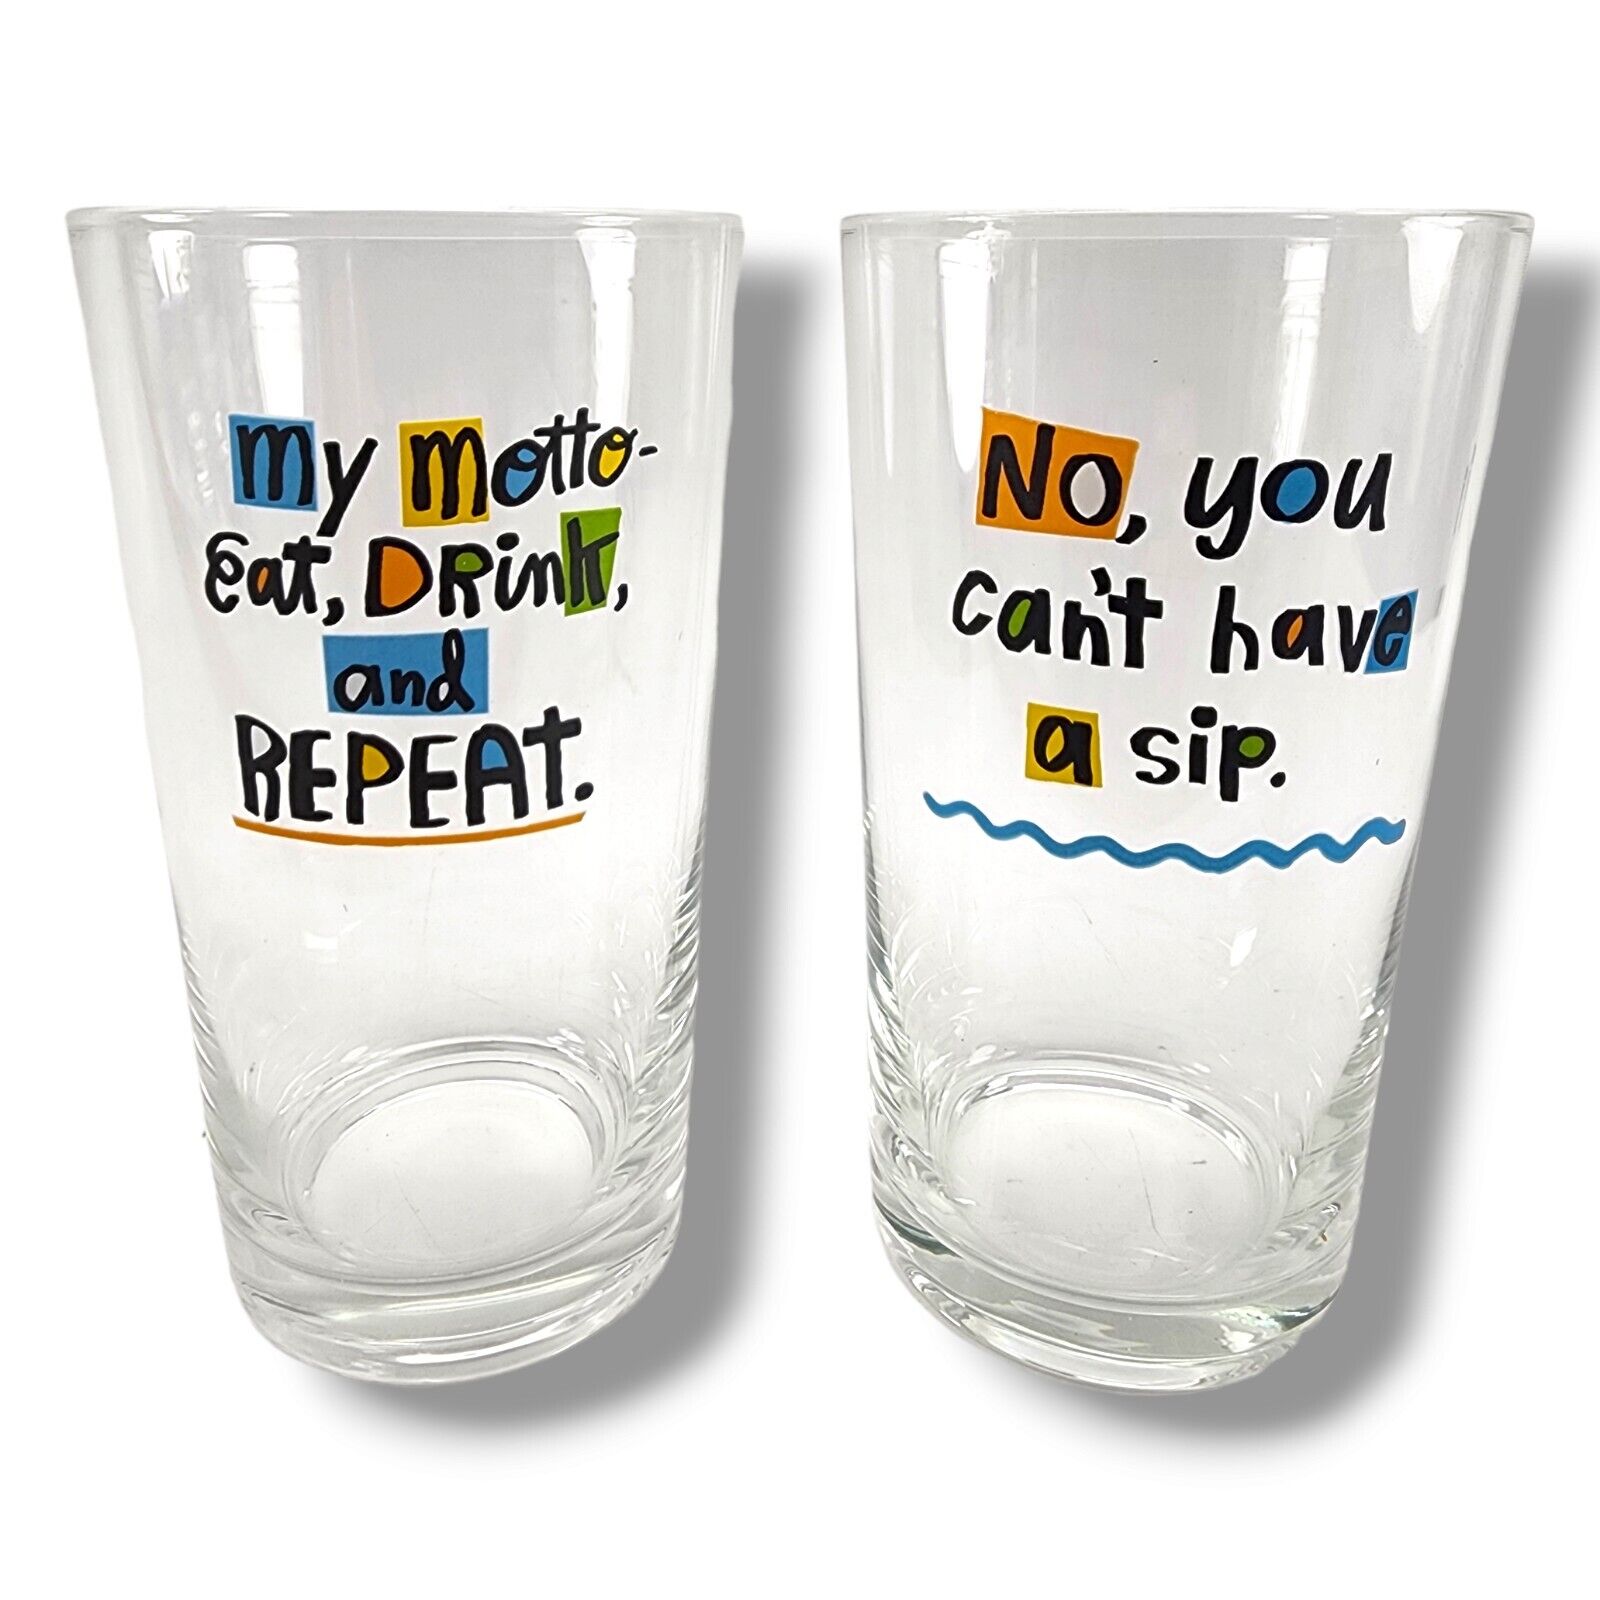 Vintage Set of 2 My MoTTo EaT, DRiNK, and REPEAT + NO YOU CANT Novelty Glasses  